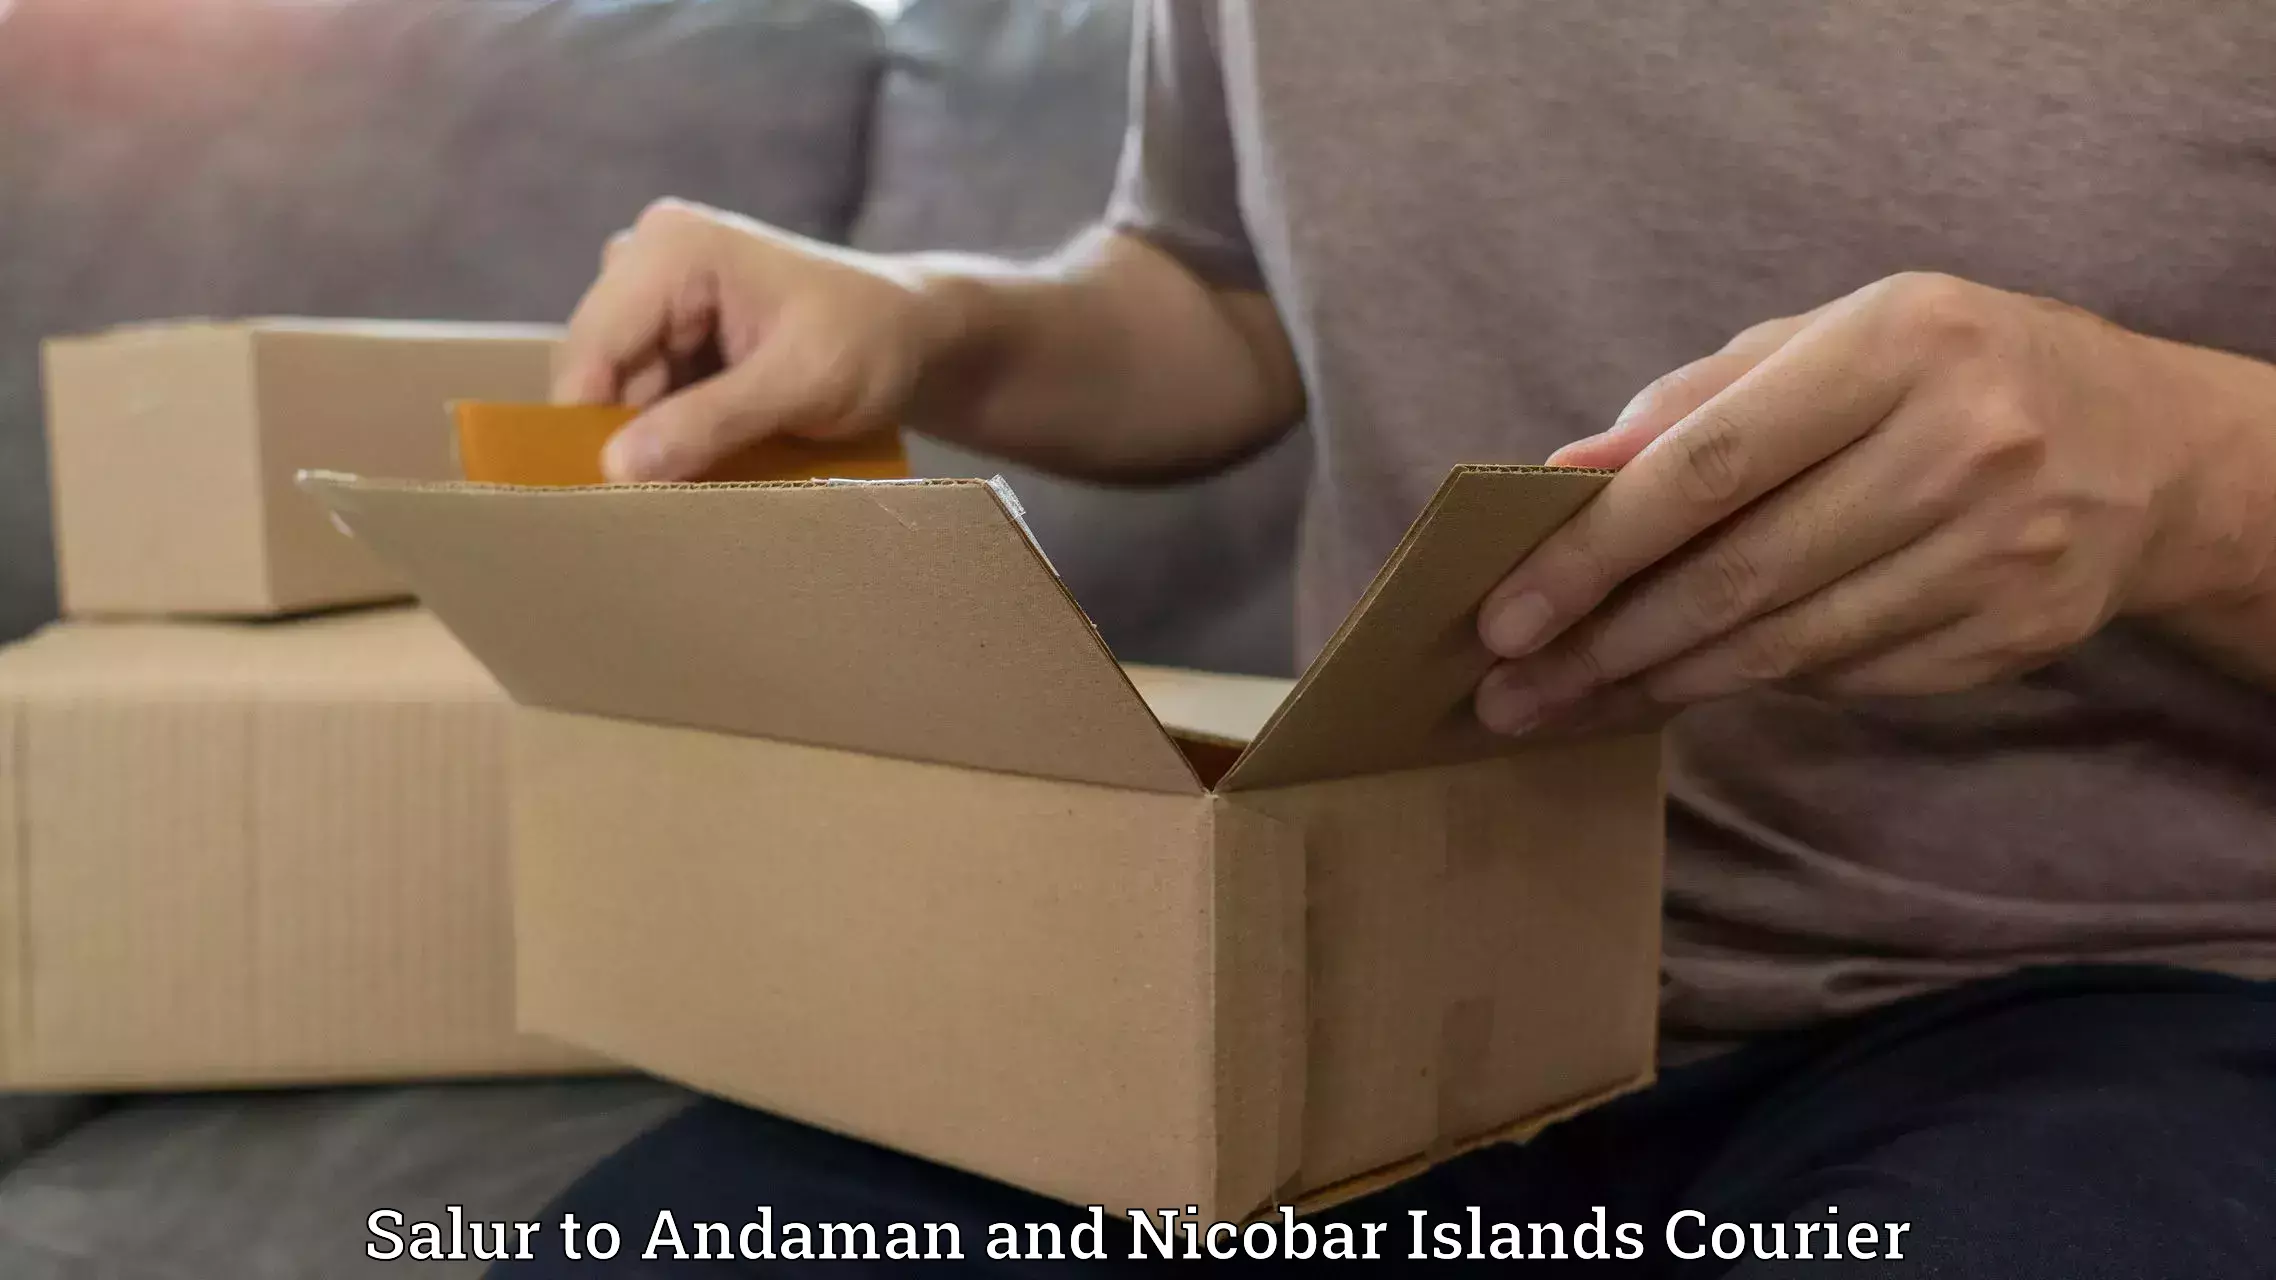 User-friendly courier app Salur to Andaman and Nicobar Islands